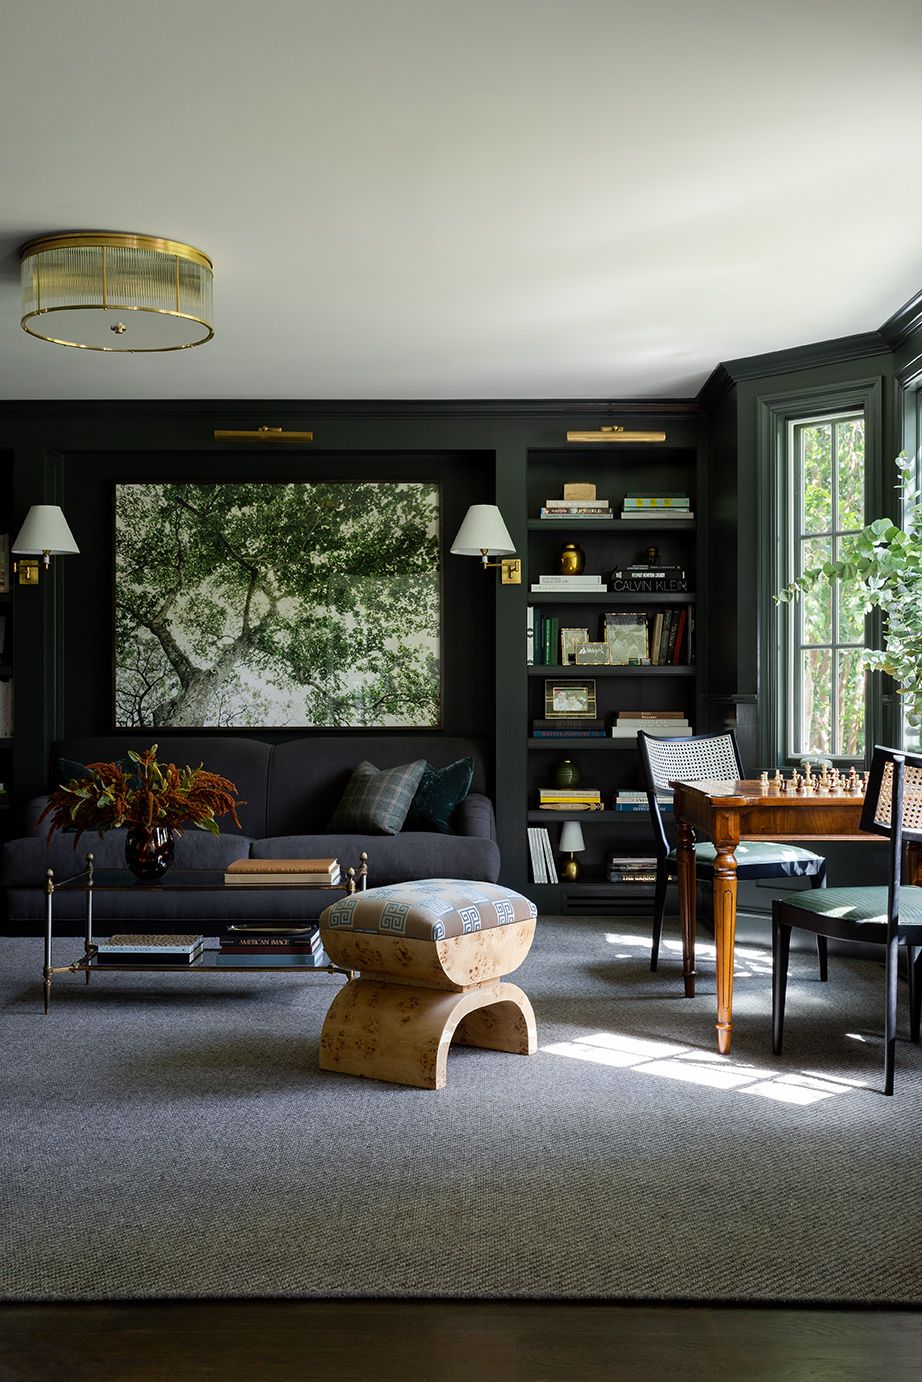 21 Green Living Room Ideas for a Relaxing Decor Upgrade